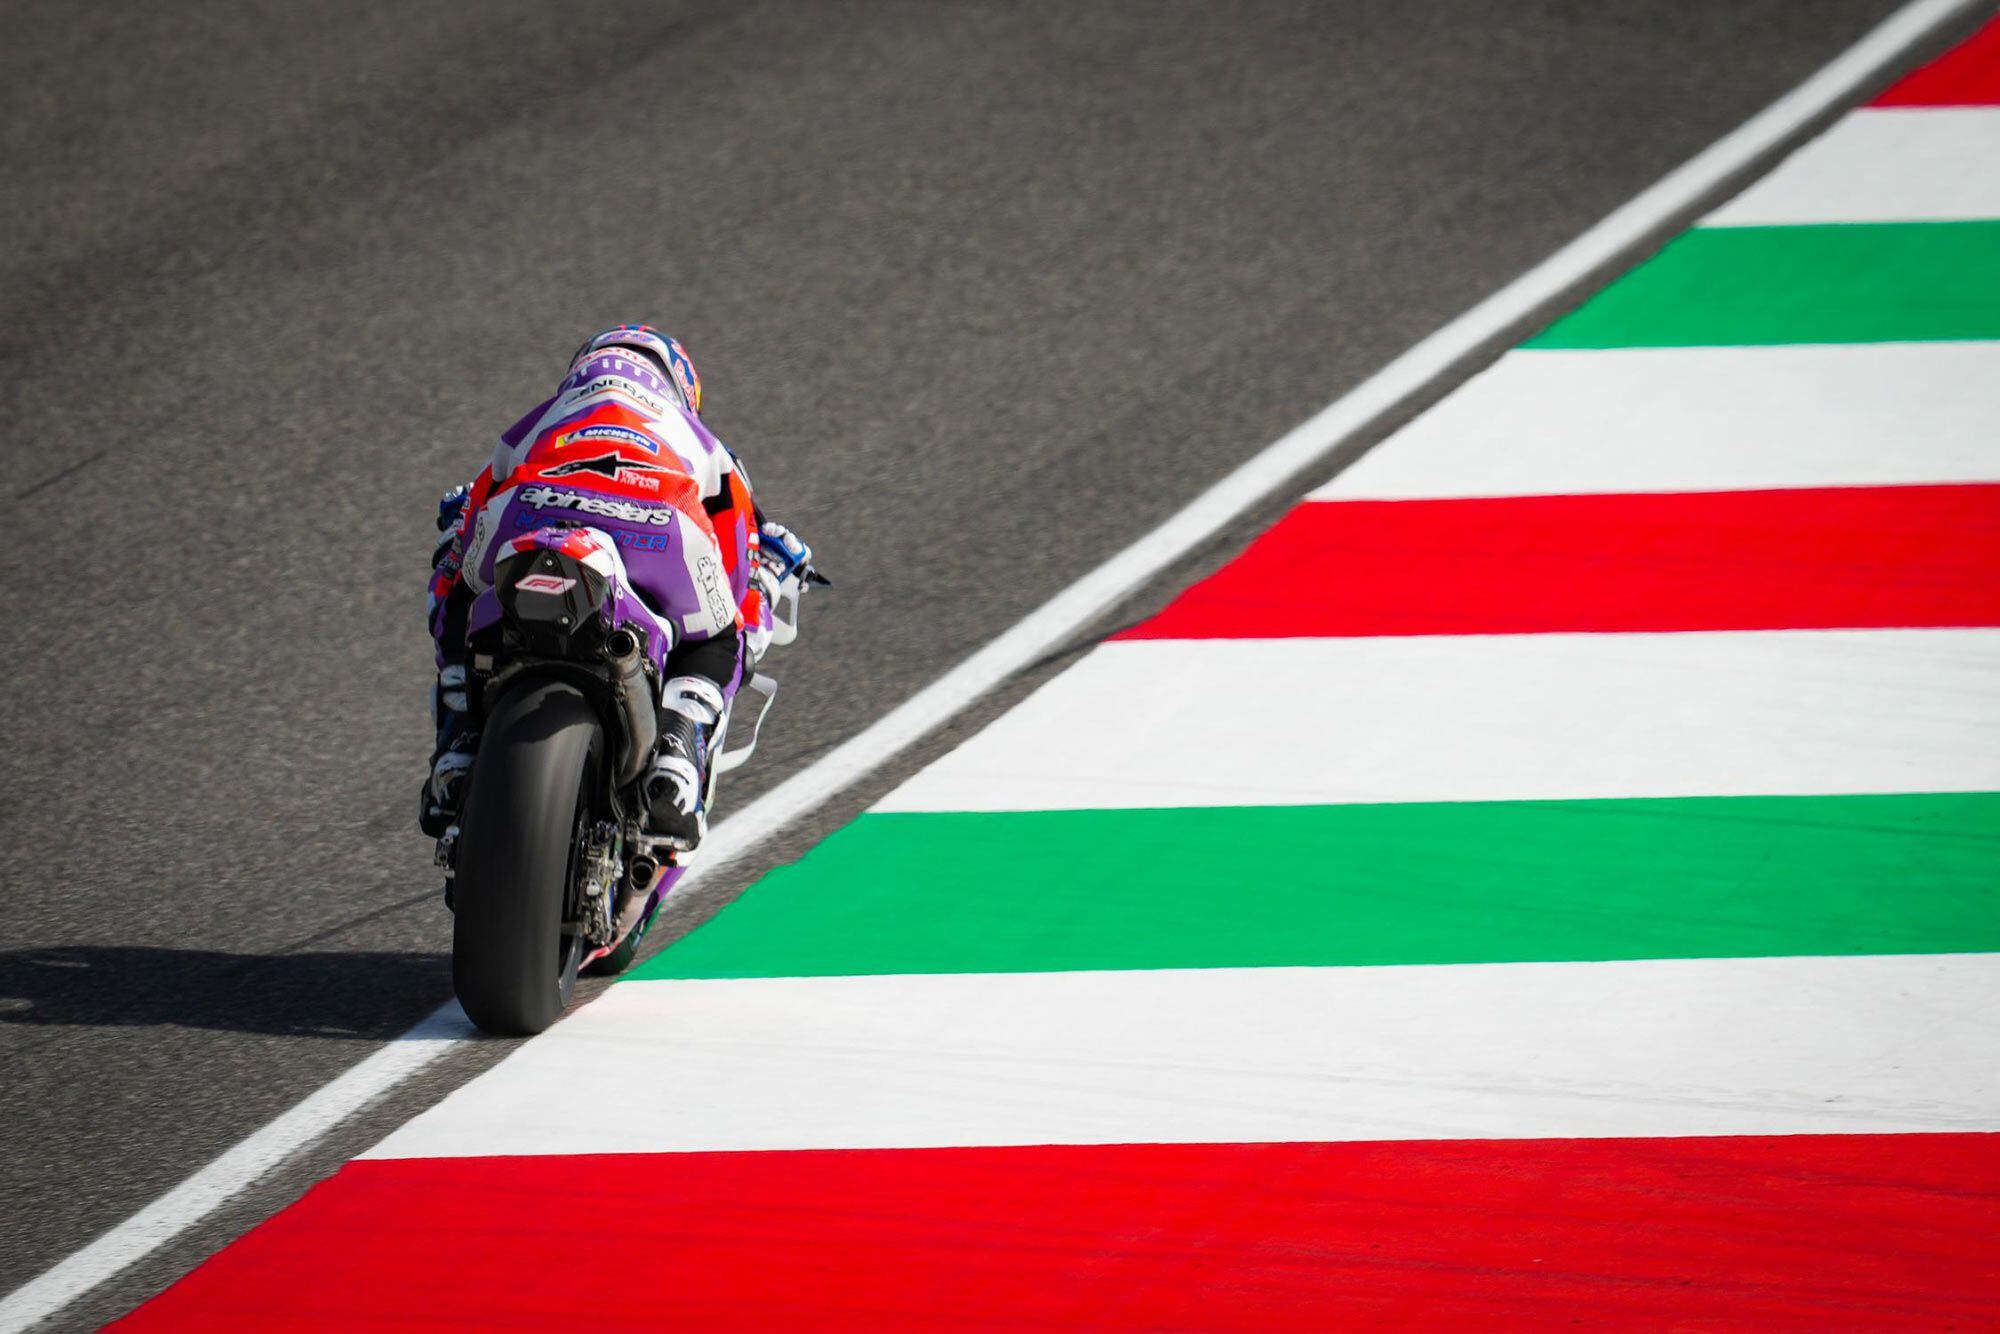 Jorge Martín hit 225.4 mph at Mugello, an all-time MotoGP top speed record.